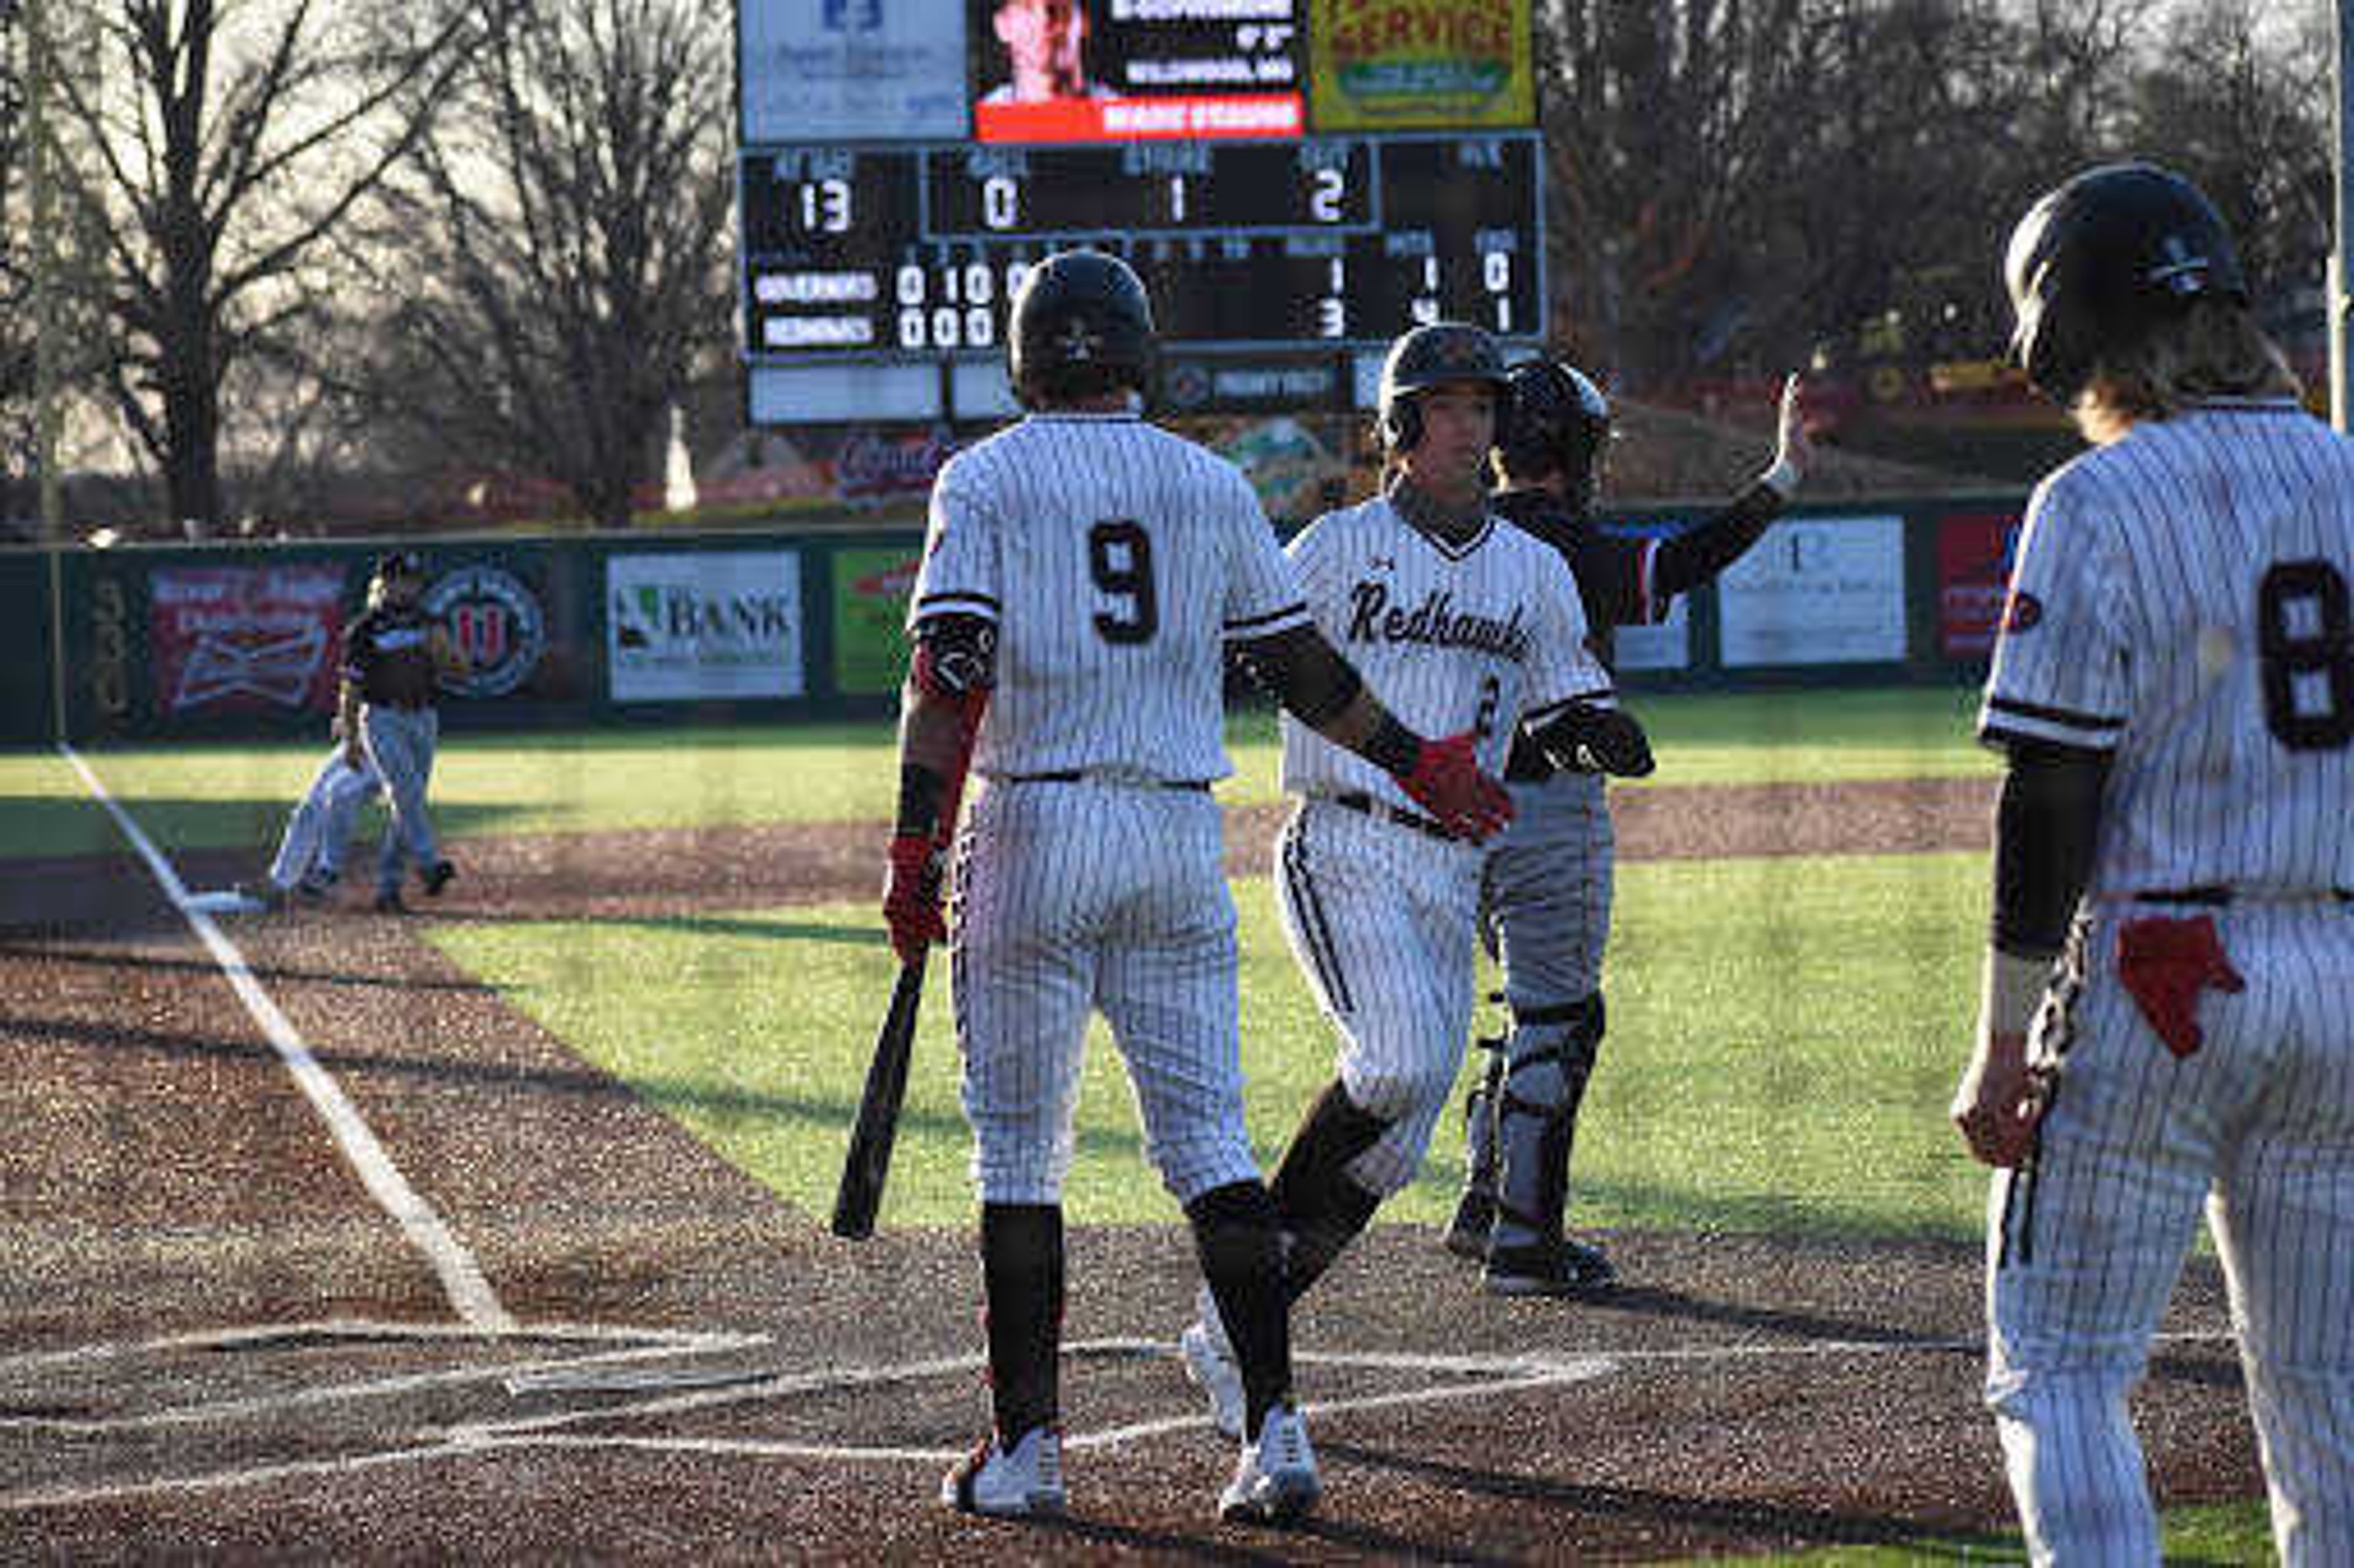 Tyler Wilber (9) hi-fives Connor Basler (2) as Basler crosses the plate during Southeast's 6-3 win over Austin Peay on March 19 at Capaha Park in Cape Girardeau.